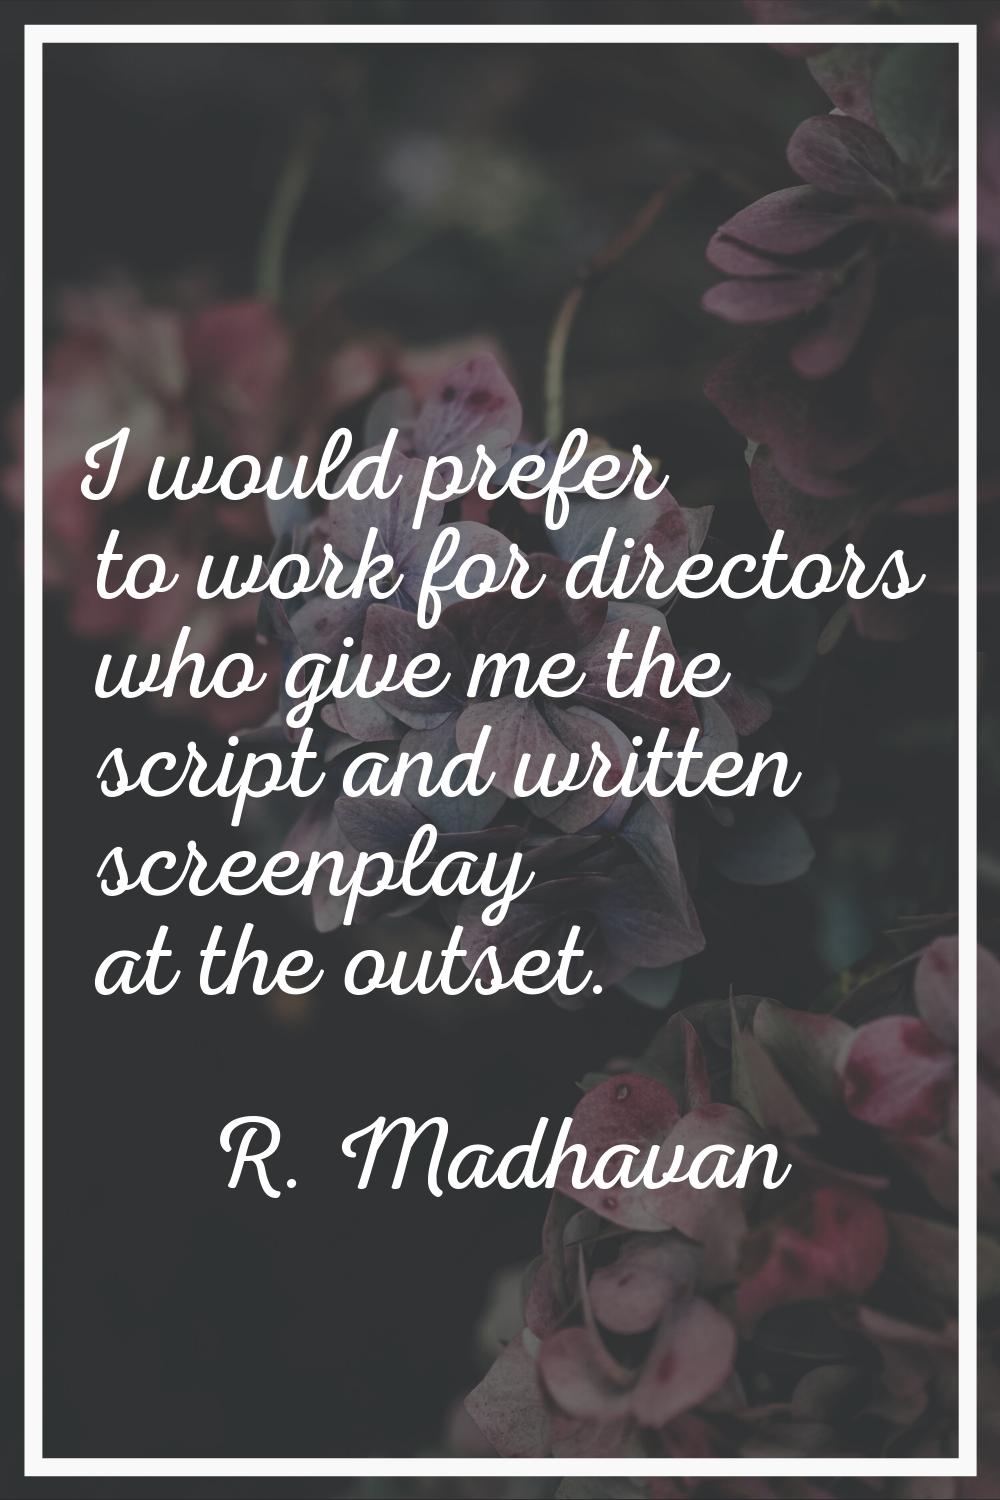 I would prefer to work for directors who give me the script and written screenplay at the outset.